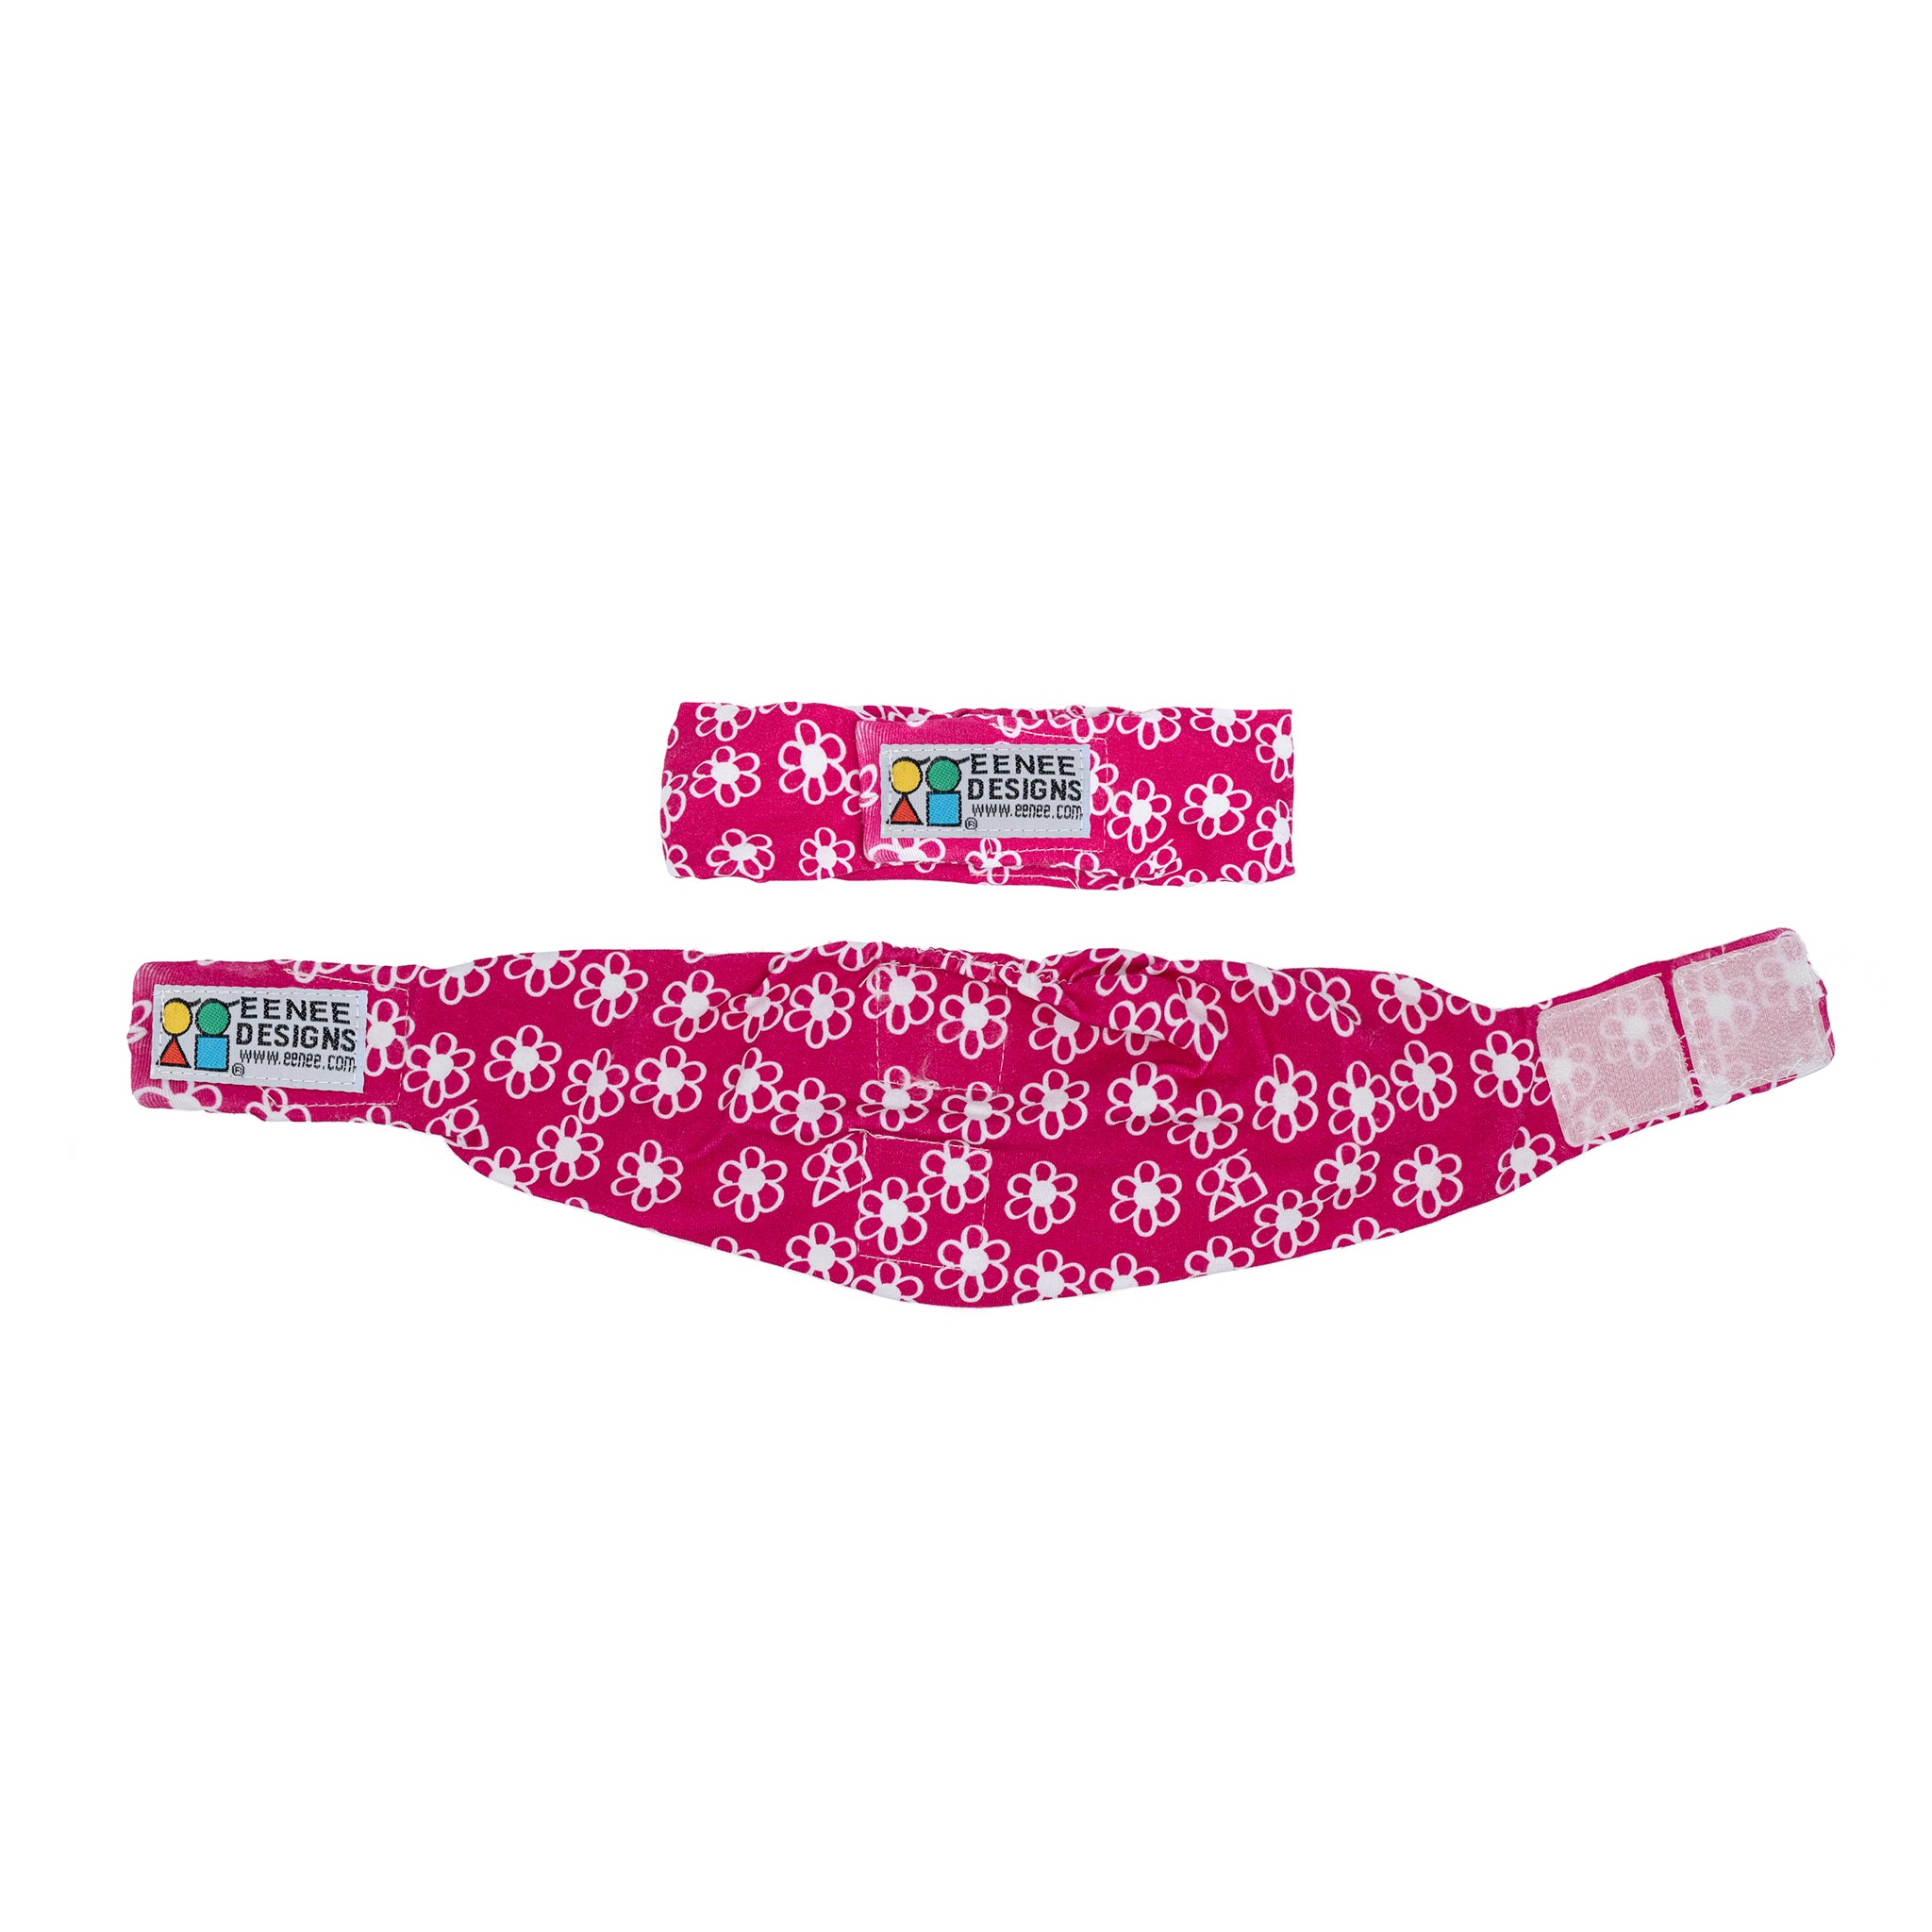 Baby tummy wrap for compostable nappies in a bright pink colour